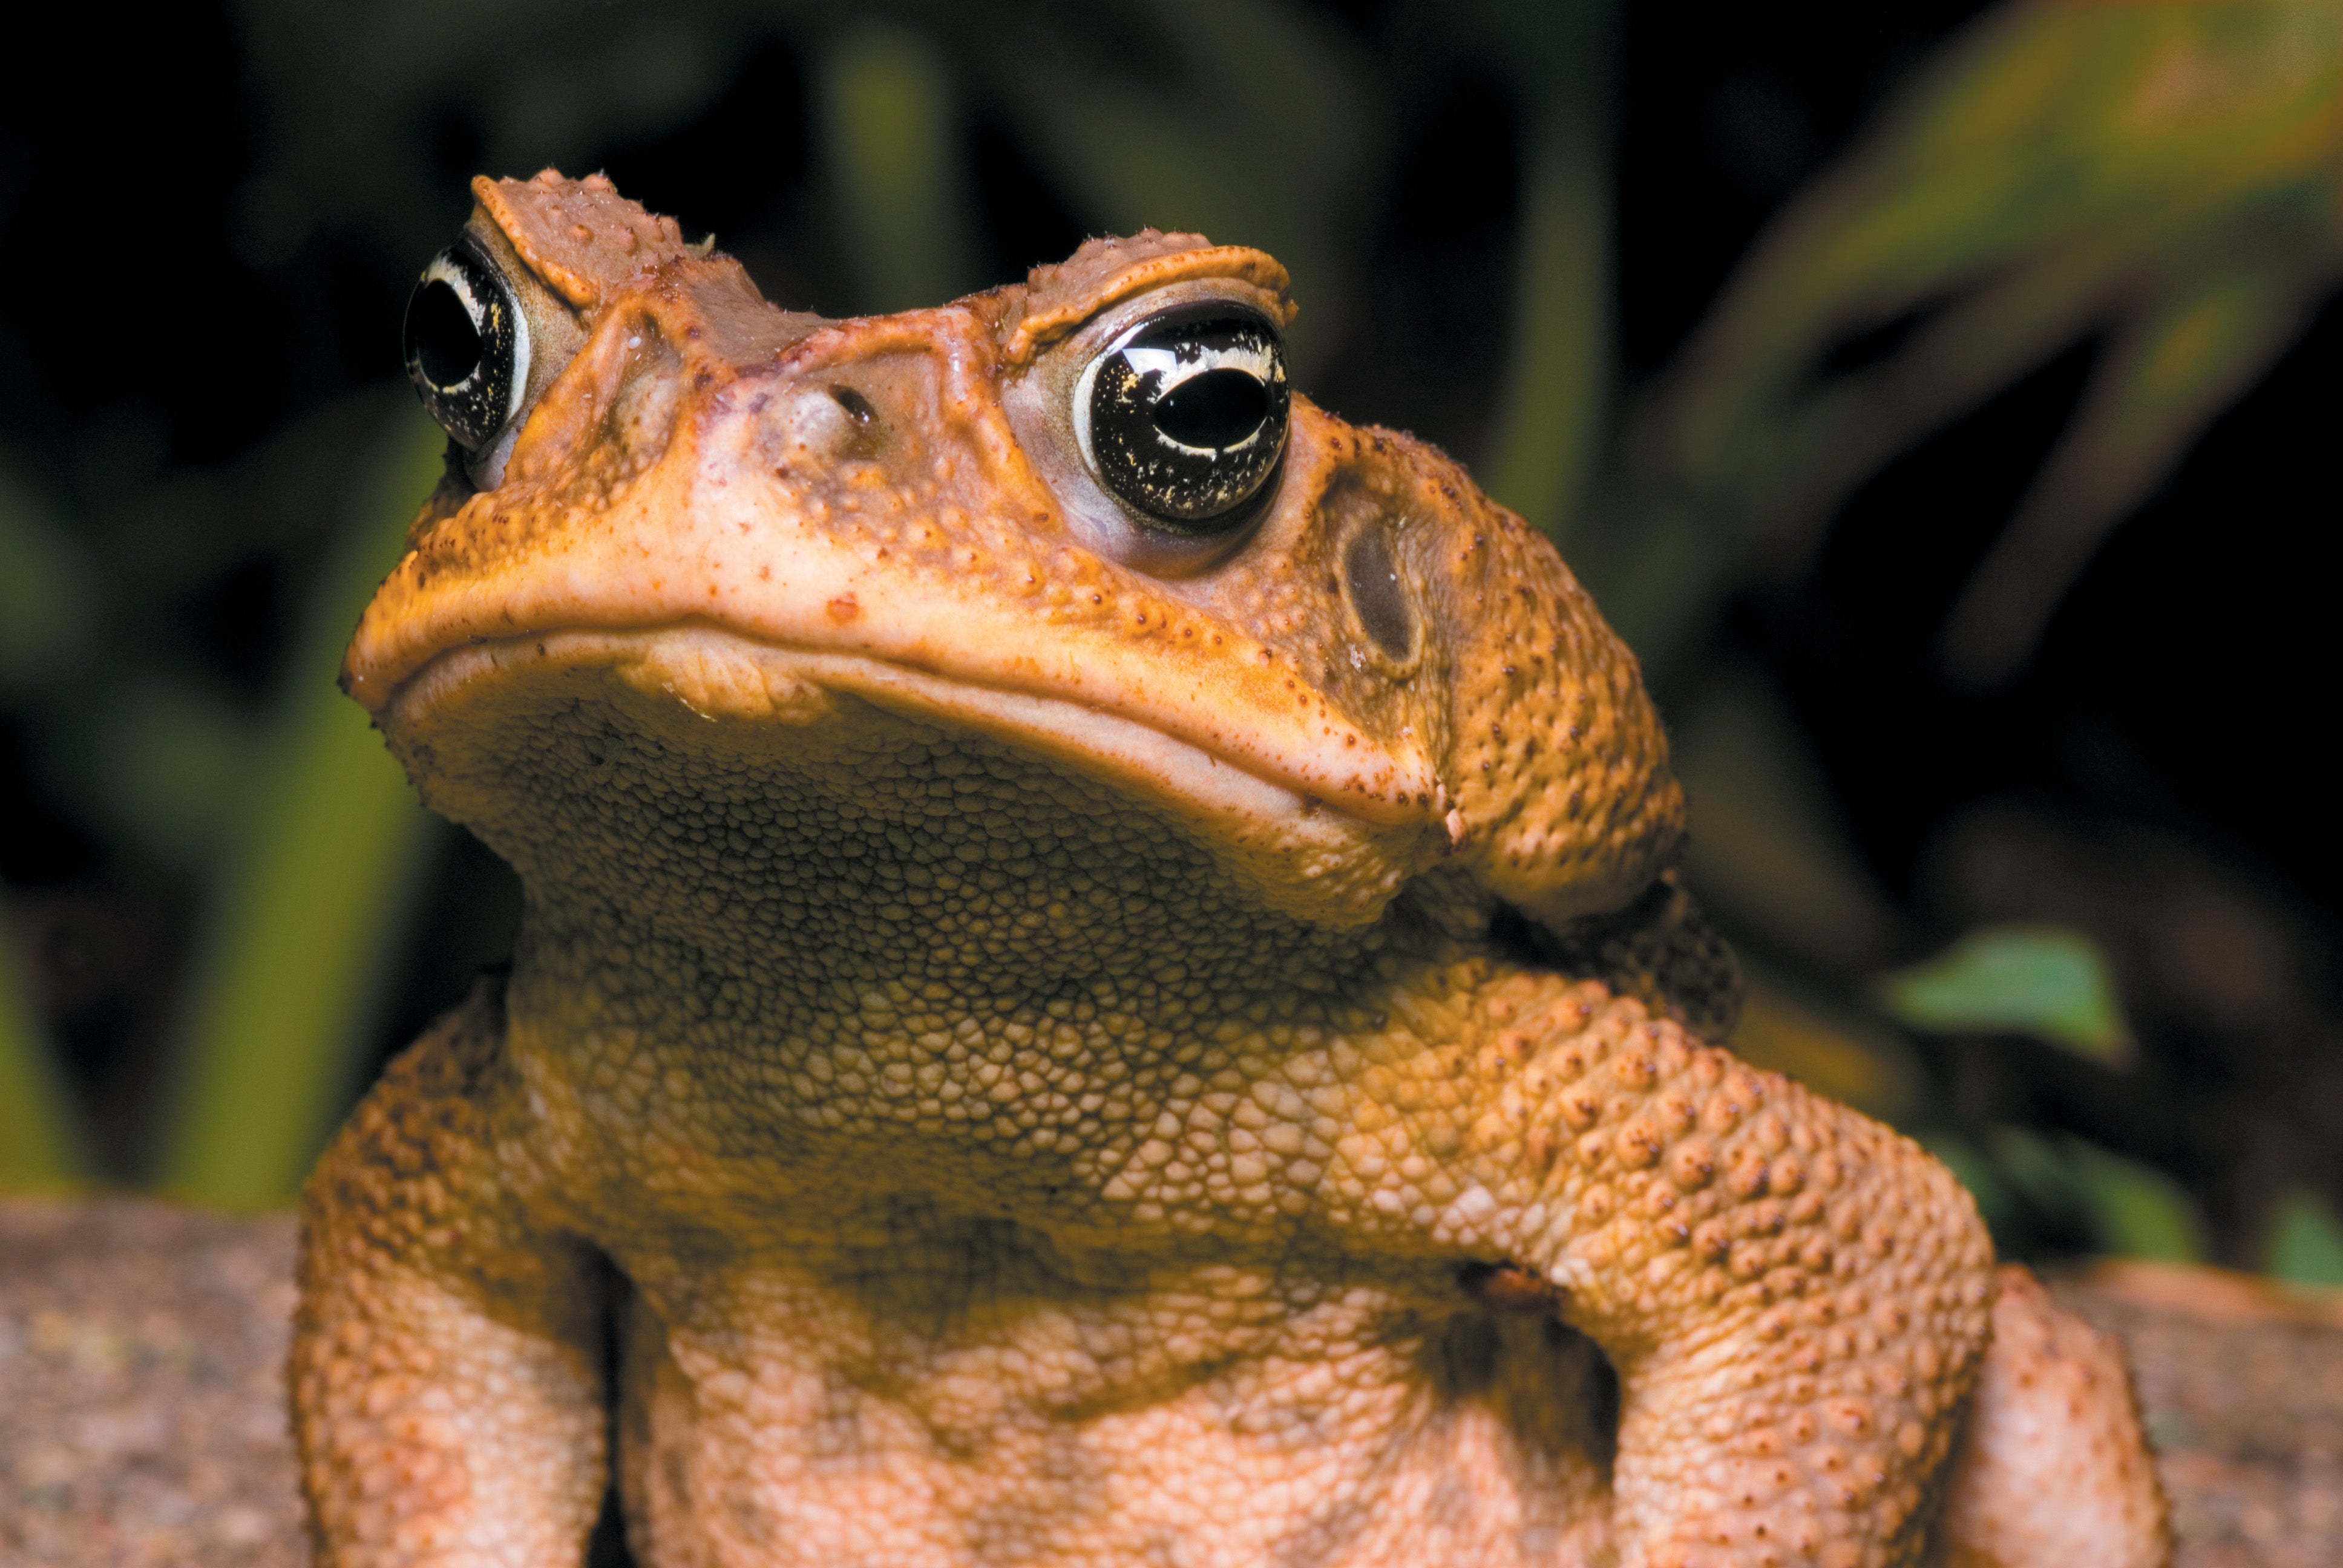 A close-up image of a toad in shown in a natural setting.